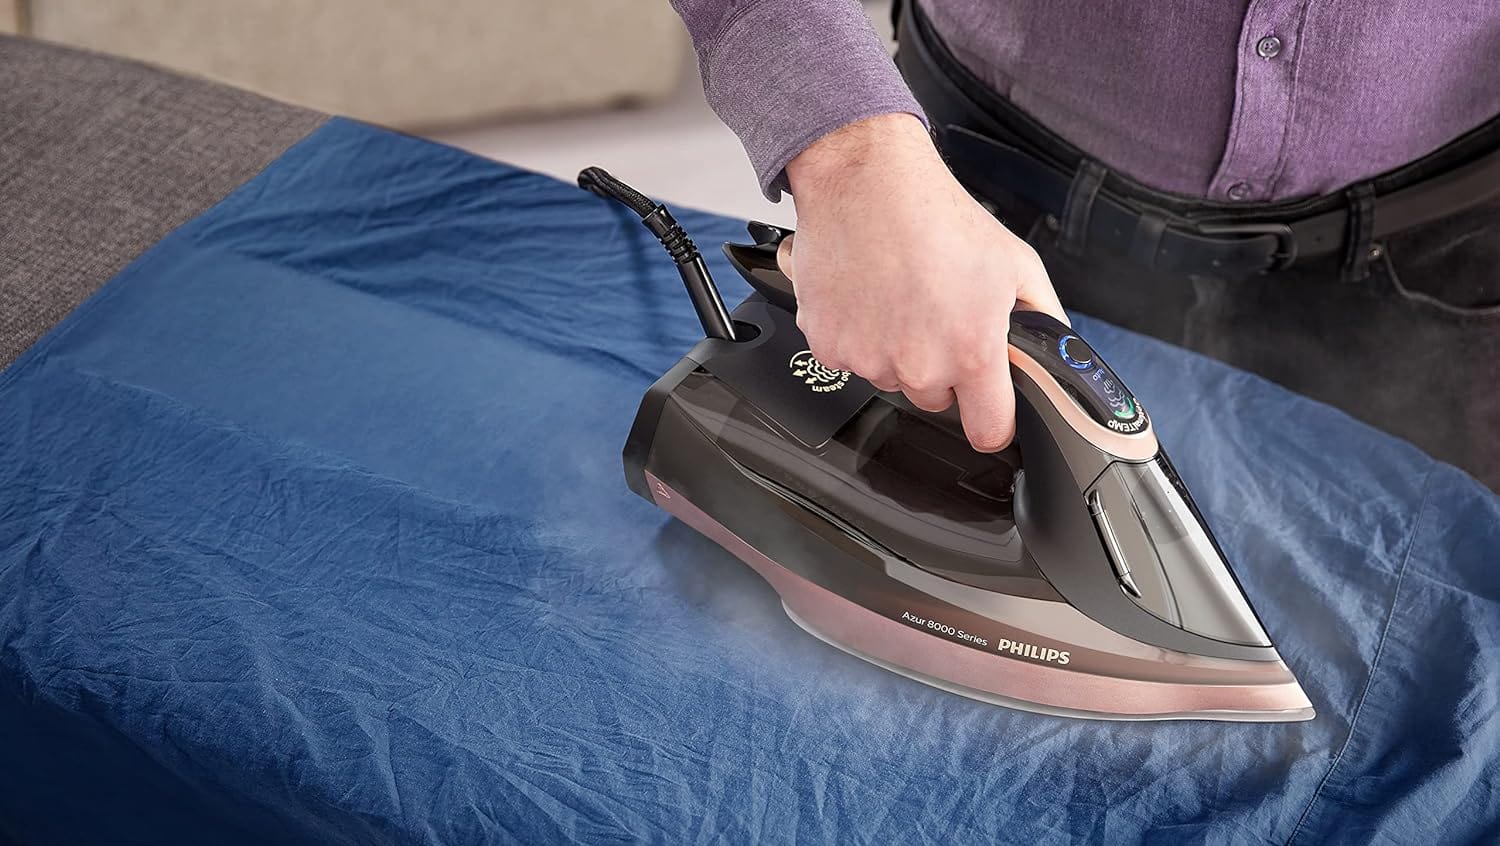 Philips Steam Iron 3000W - DST8041 | Supply Master Accra, Ghana Electric Iron Buy Tools hardware Building materials